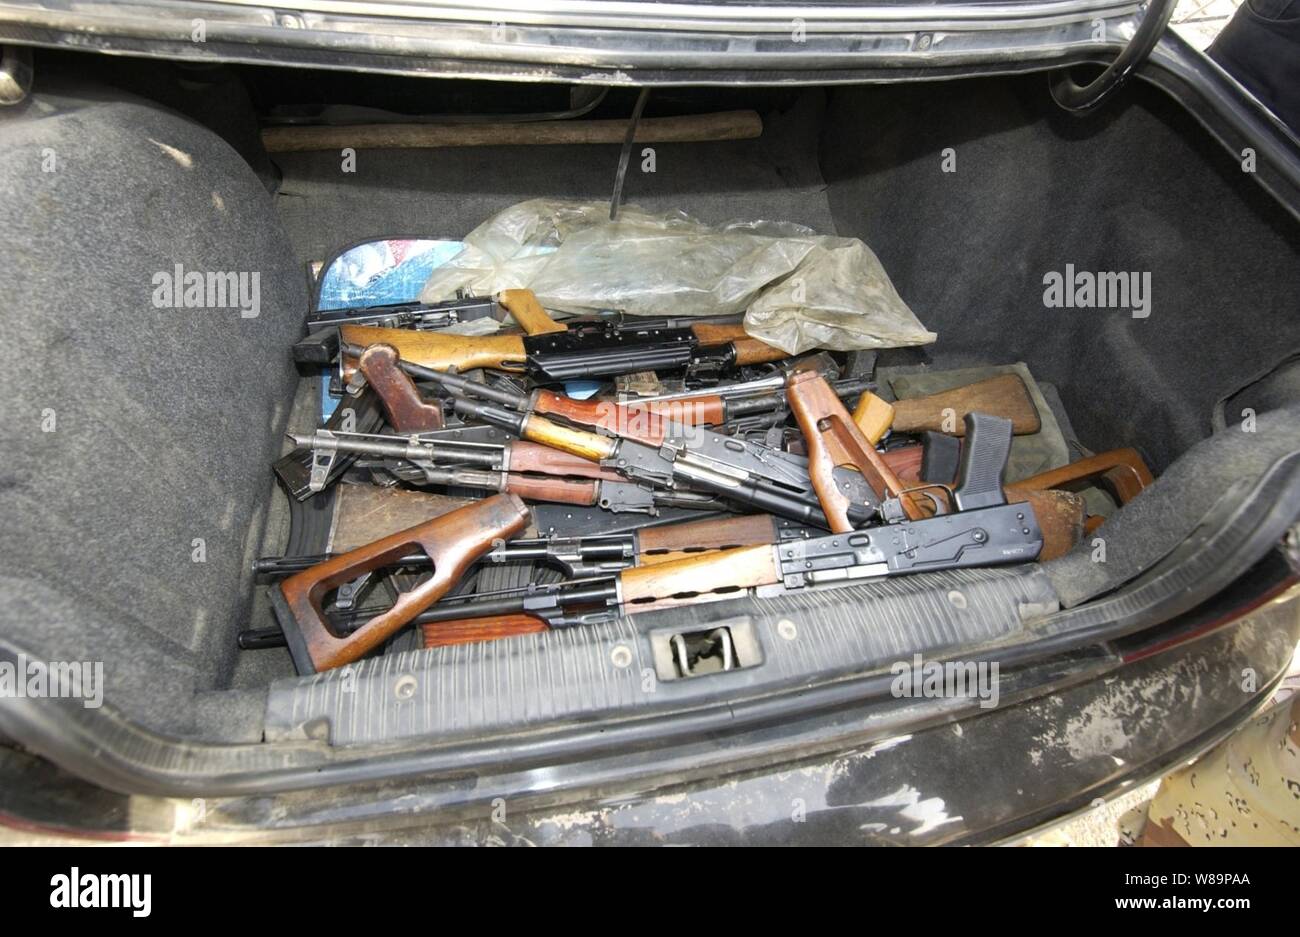 The trunk of a car contains various weapons when it arrives at the Al-Jezaaer Police Station during the initial day of Sadr Bureau's weapons buy-back program in Sadr City, Iraq, on Oct. 11, 2004.  Insurgents were encouraged to bring their weapons to the local police precincts throughout Sadr city in exchange for government coupons and money. Stock Photo